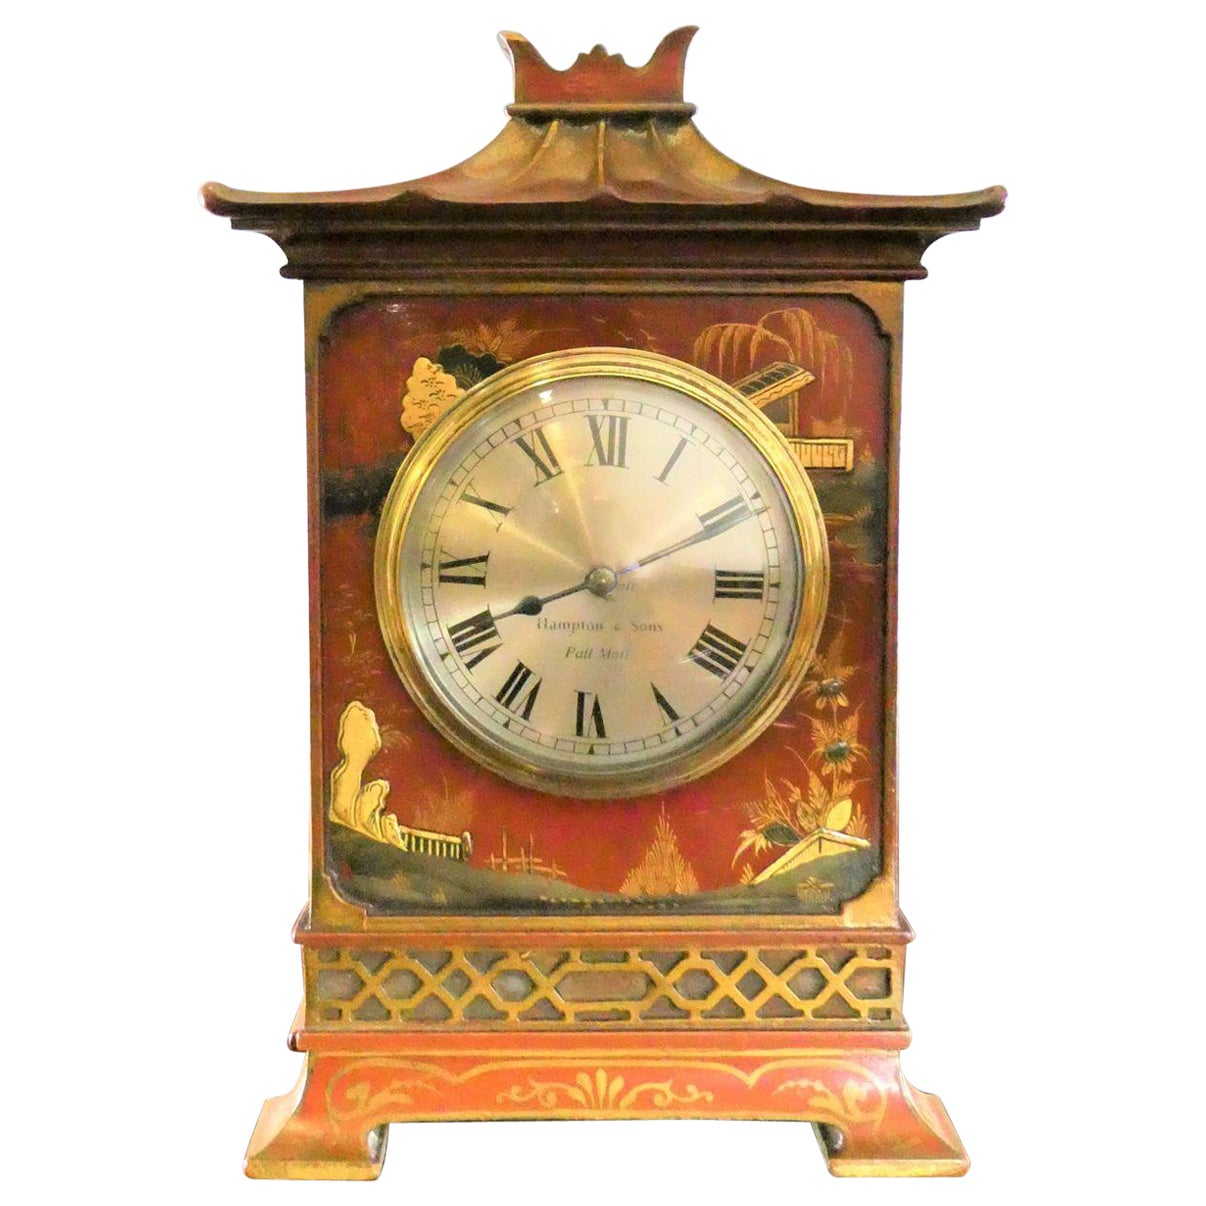 Edwardian Mantel Clock with Chinoiserie Decoration